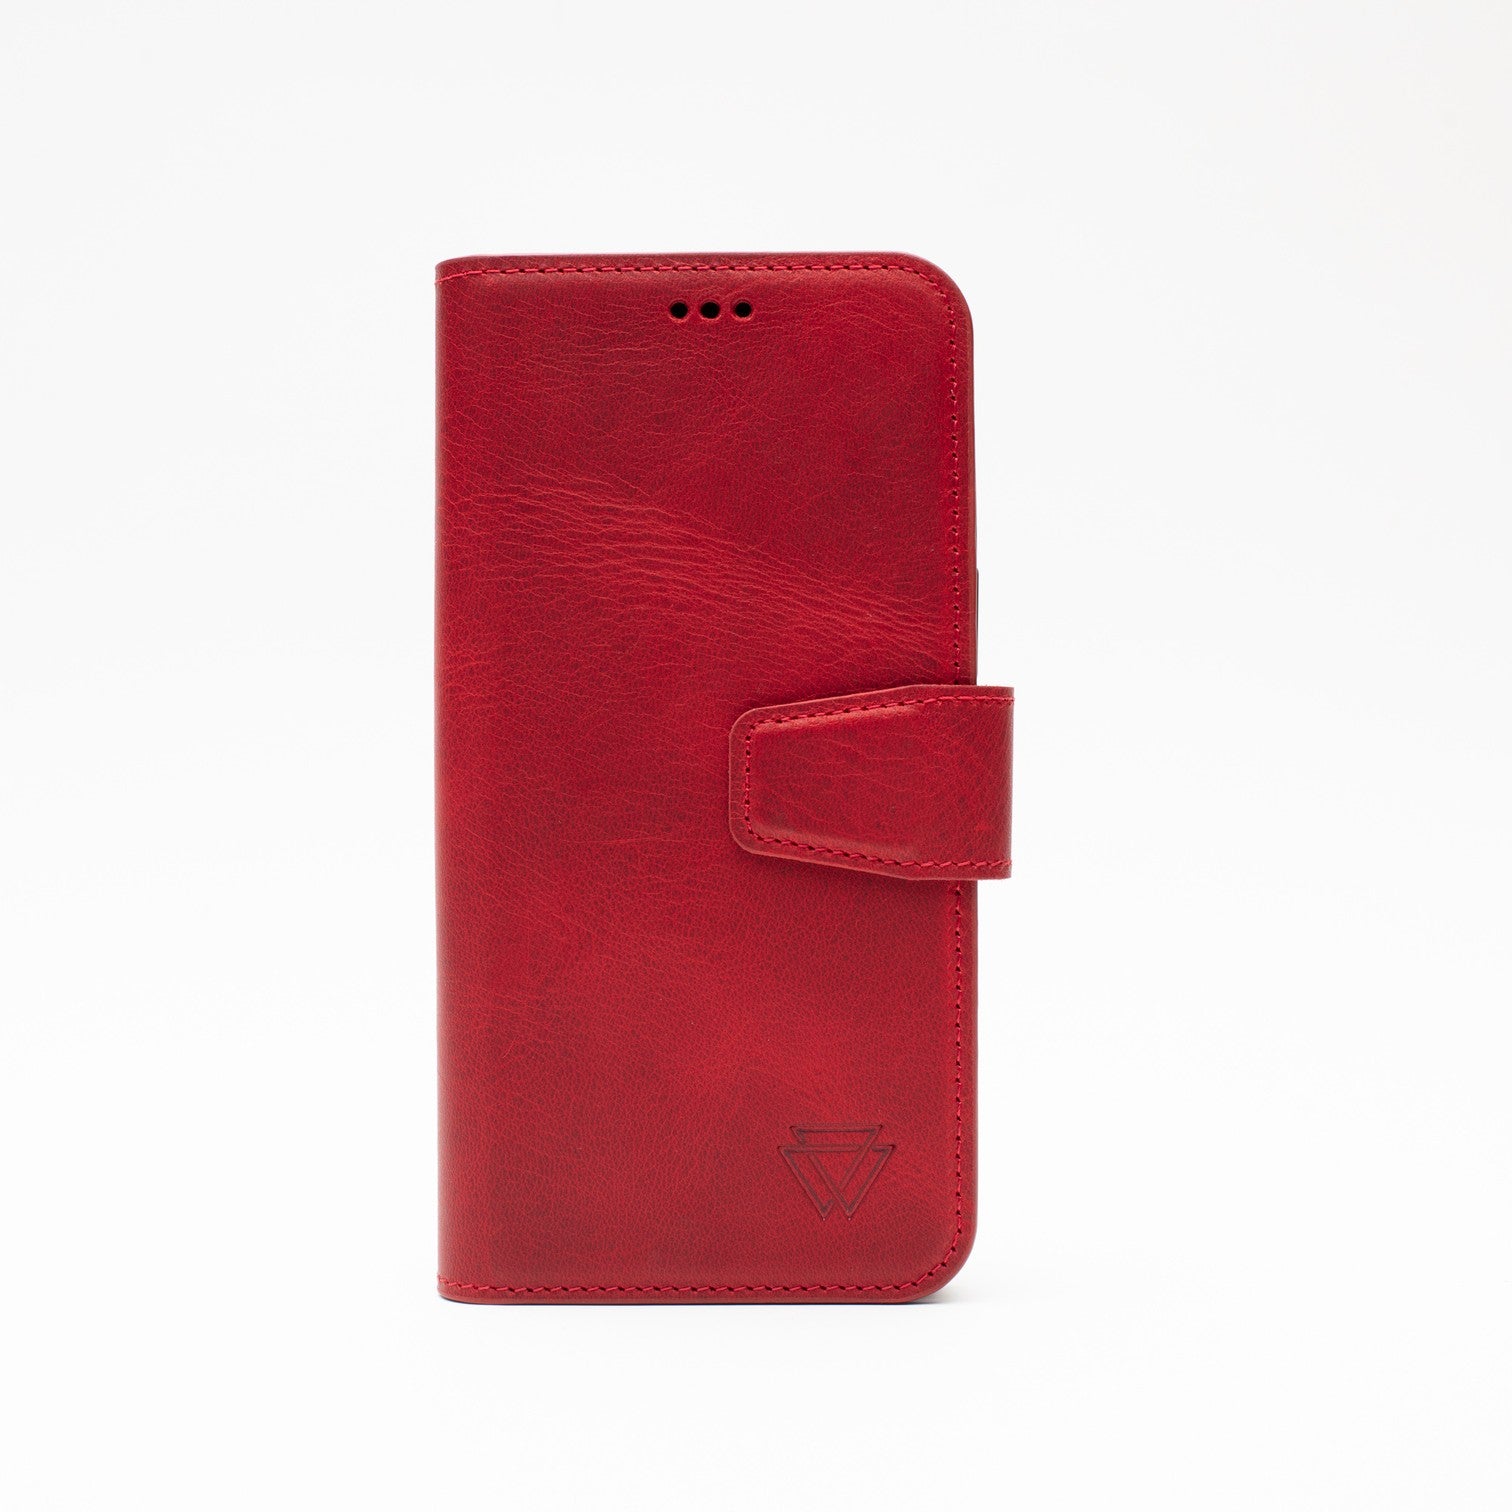 Wachikopa leather Classic iPhone Case for iPhone 12 Pro Max Red